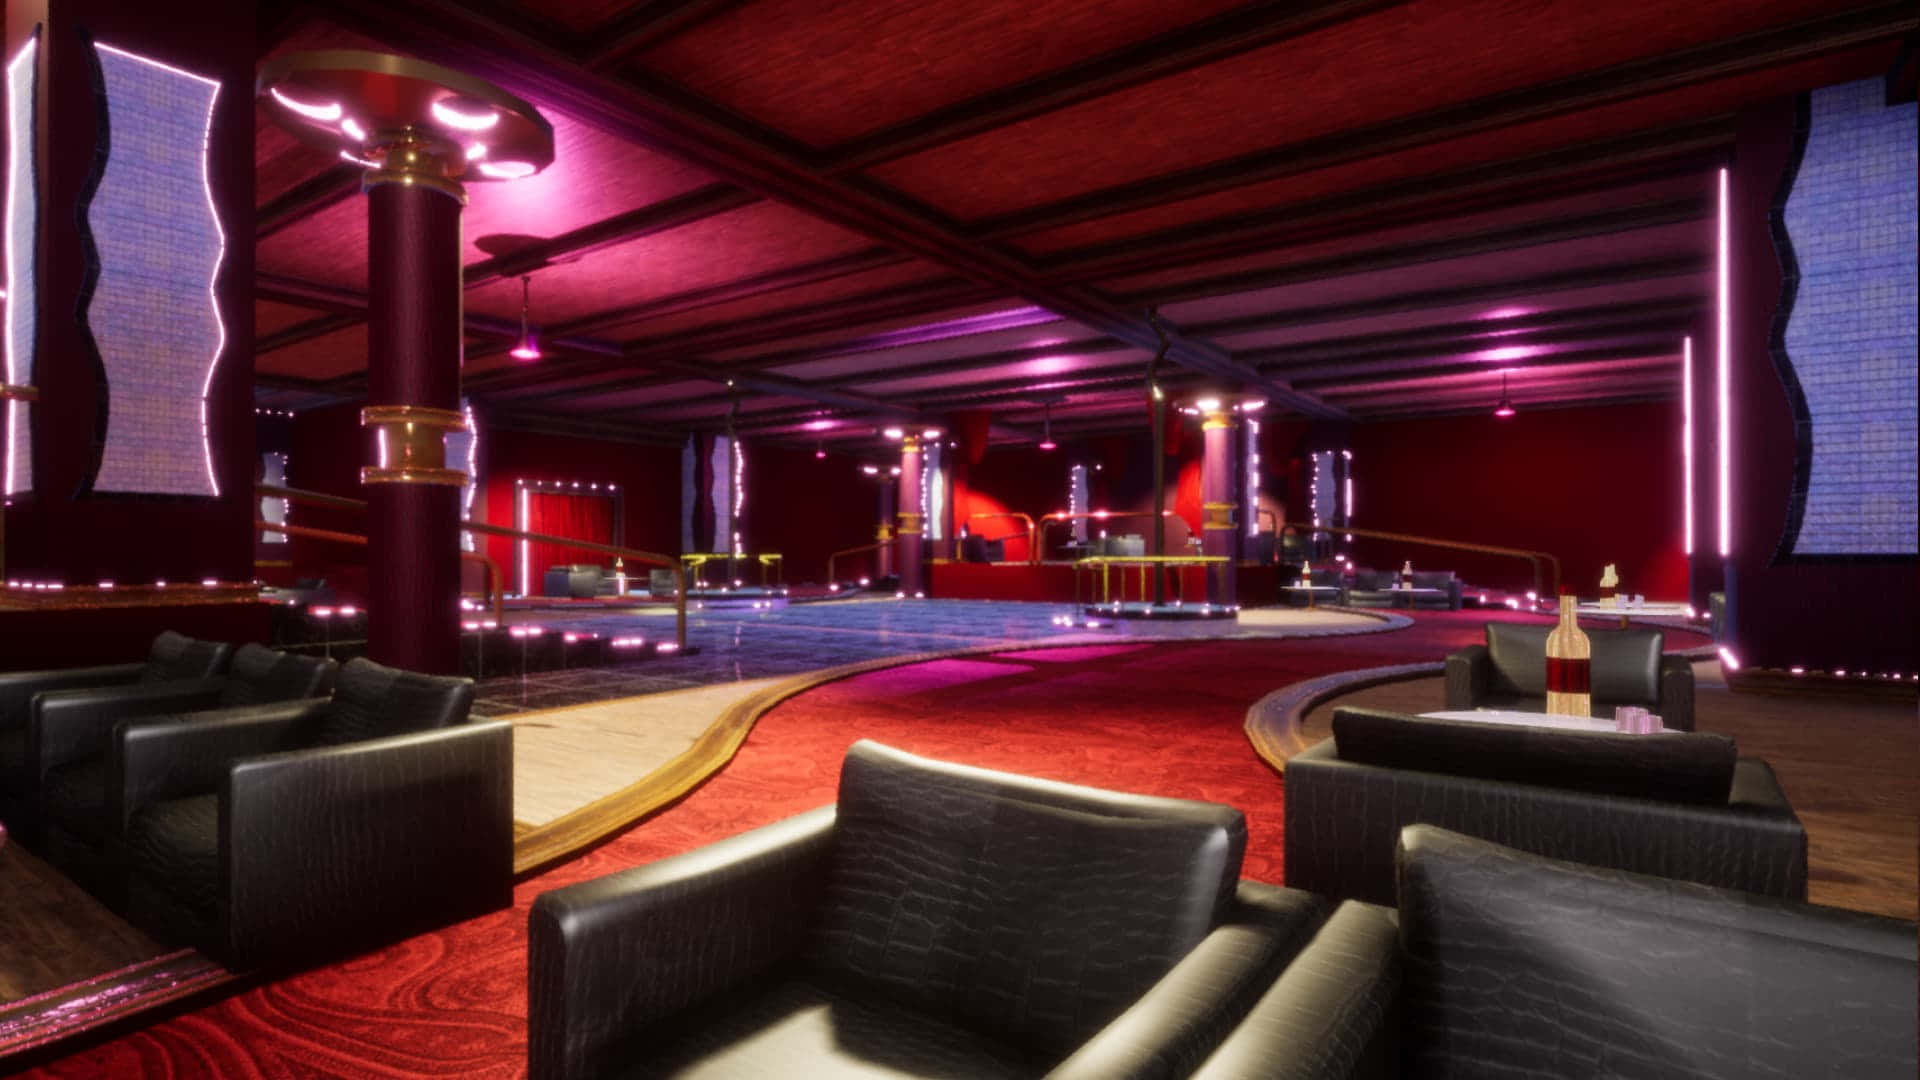 Get Ready To Dance Away The Night In This Vibrant Nightclub!